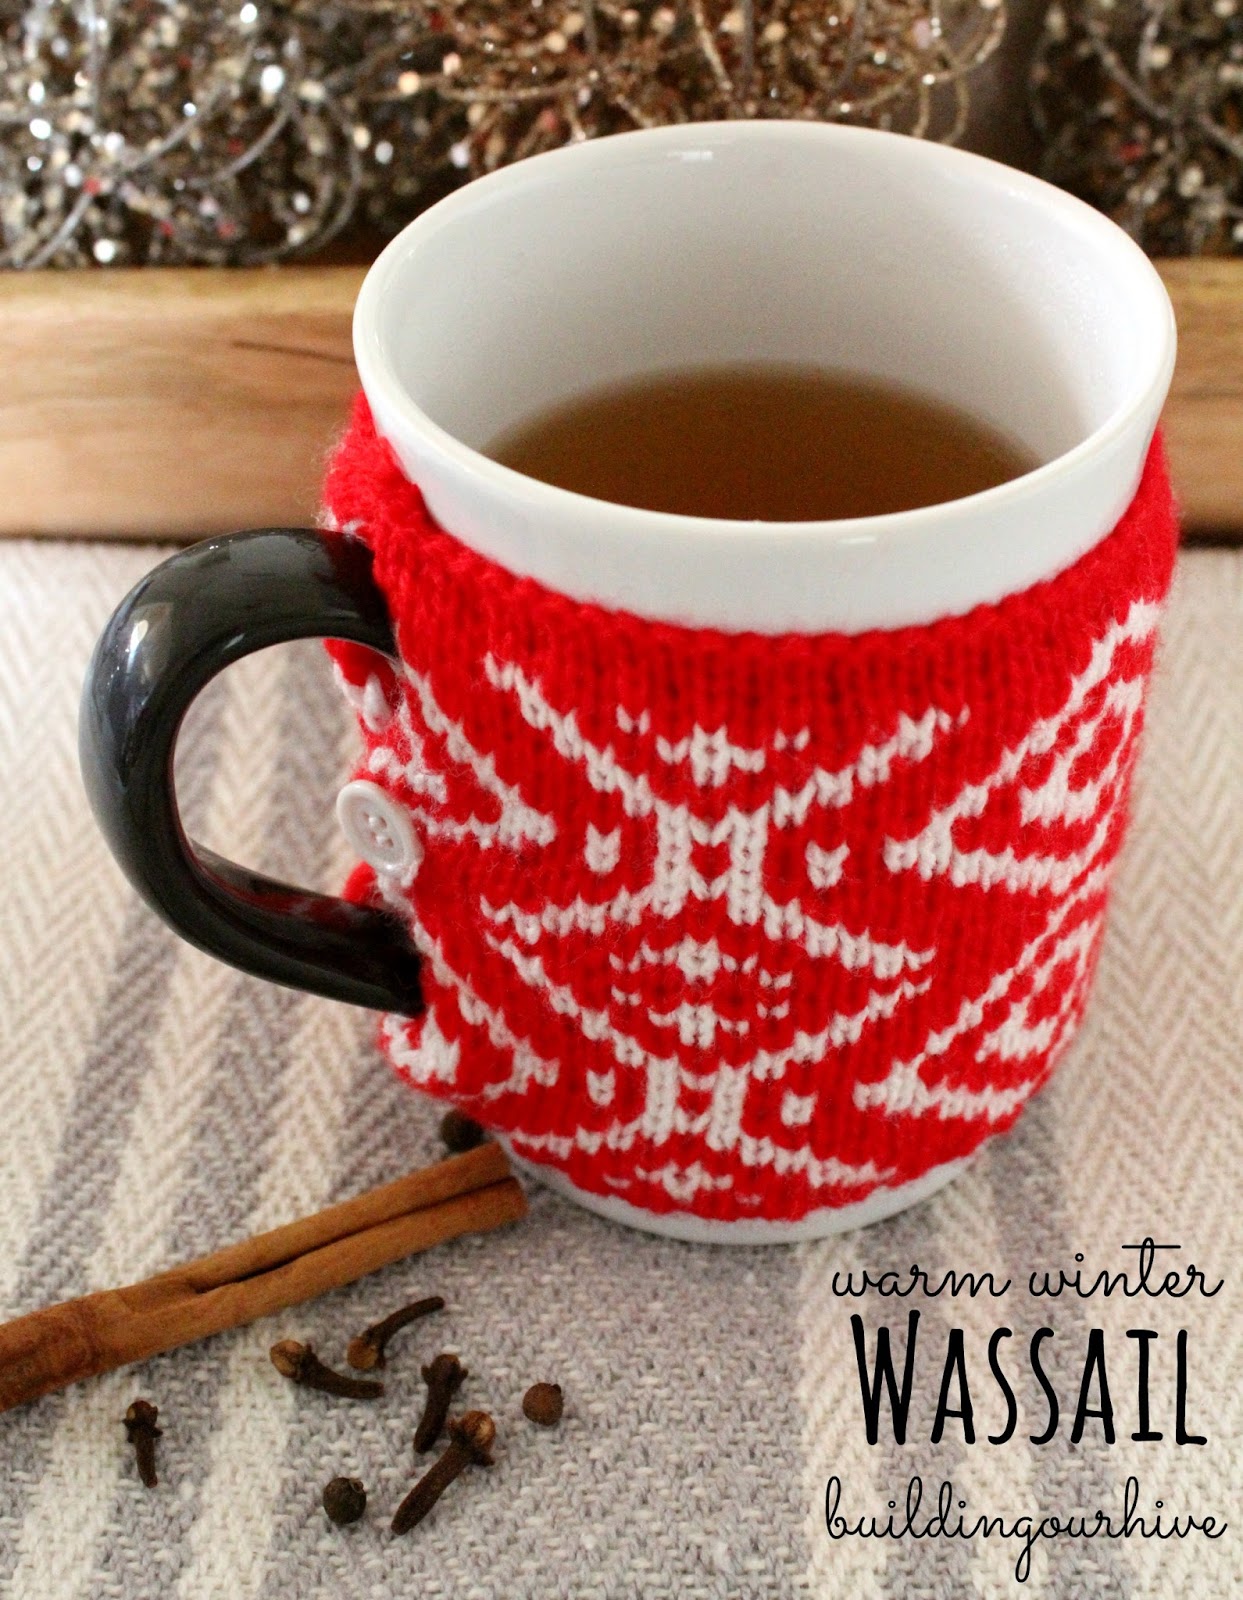 Building Our Hive: Wassail